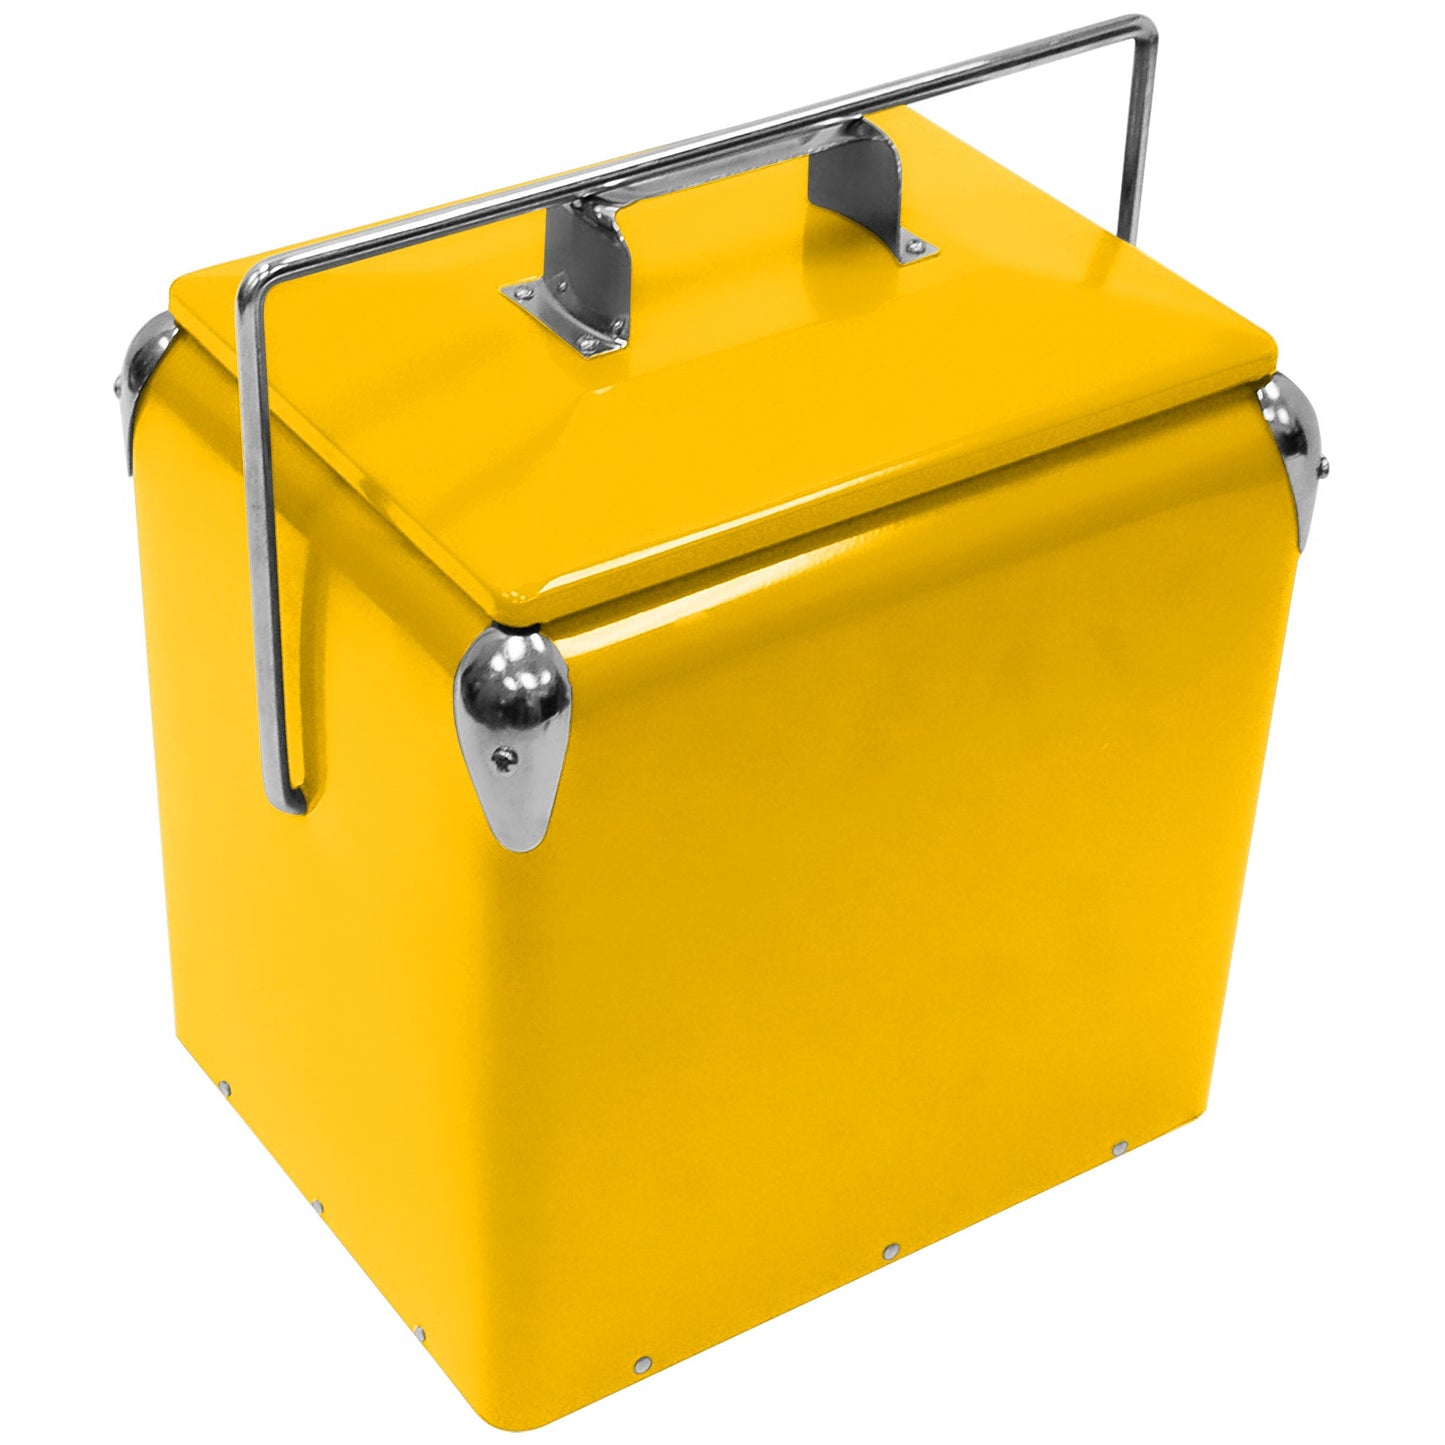 retro-legacy-cooler-in-yellow